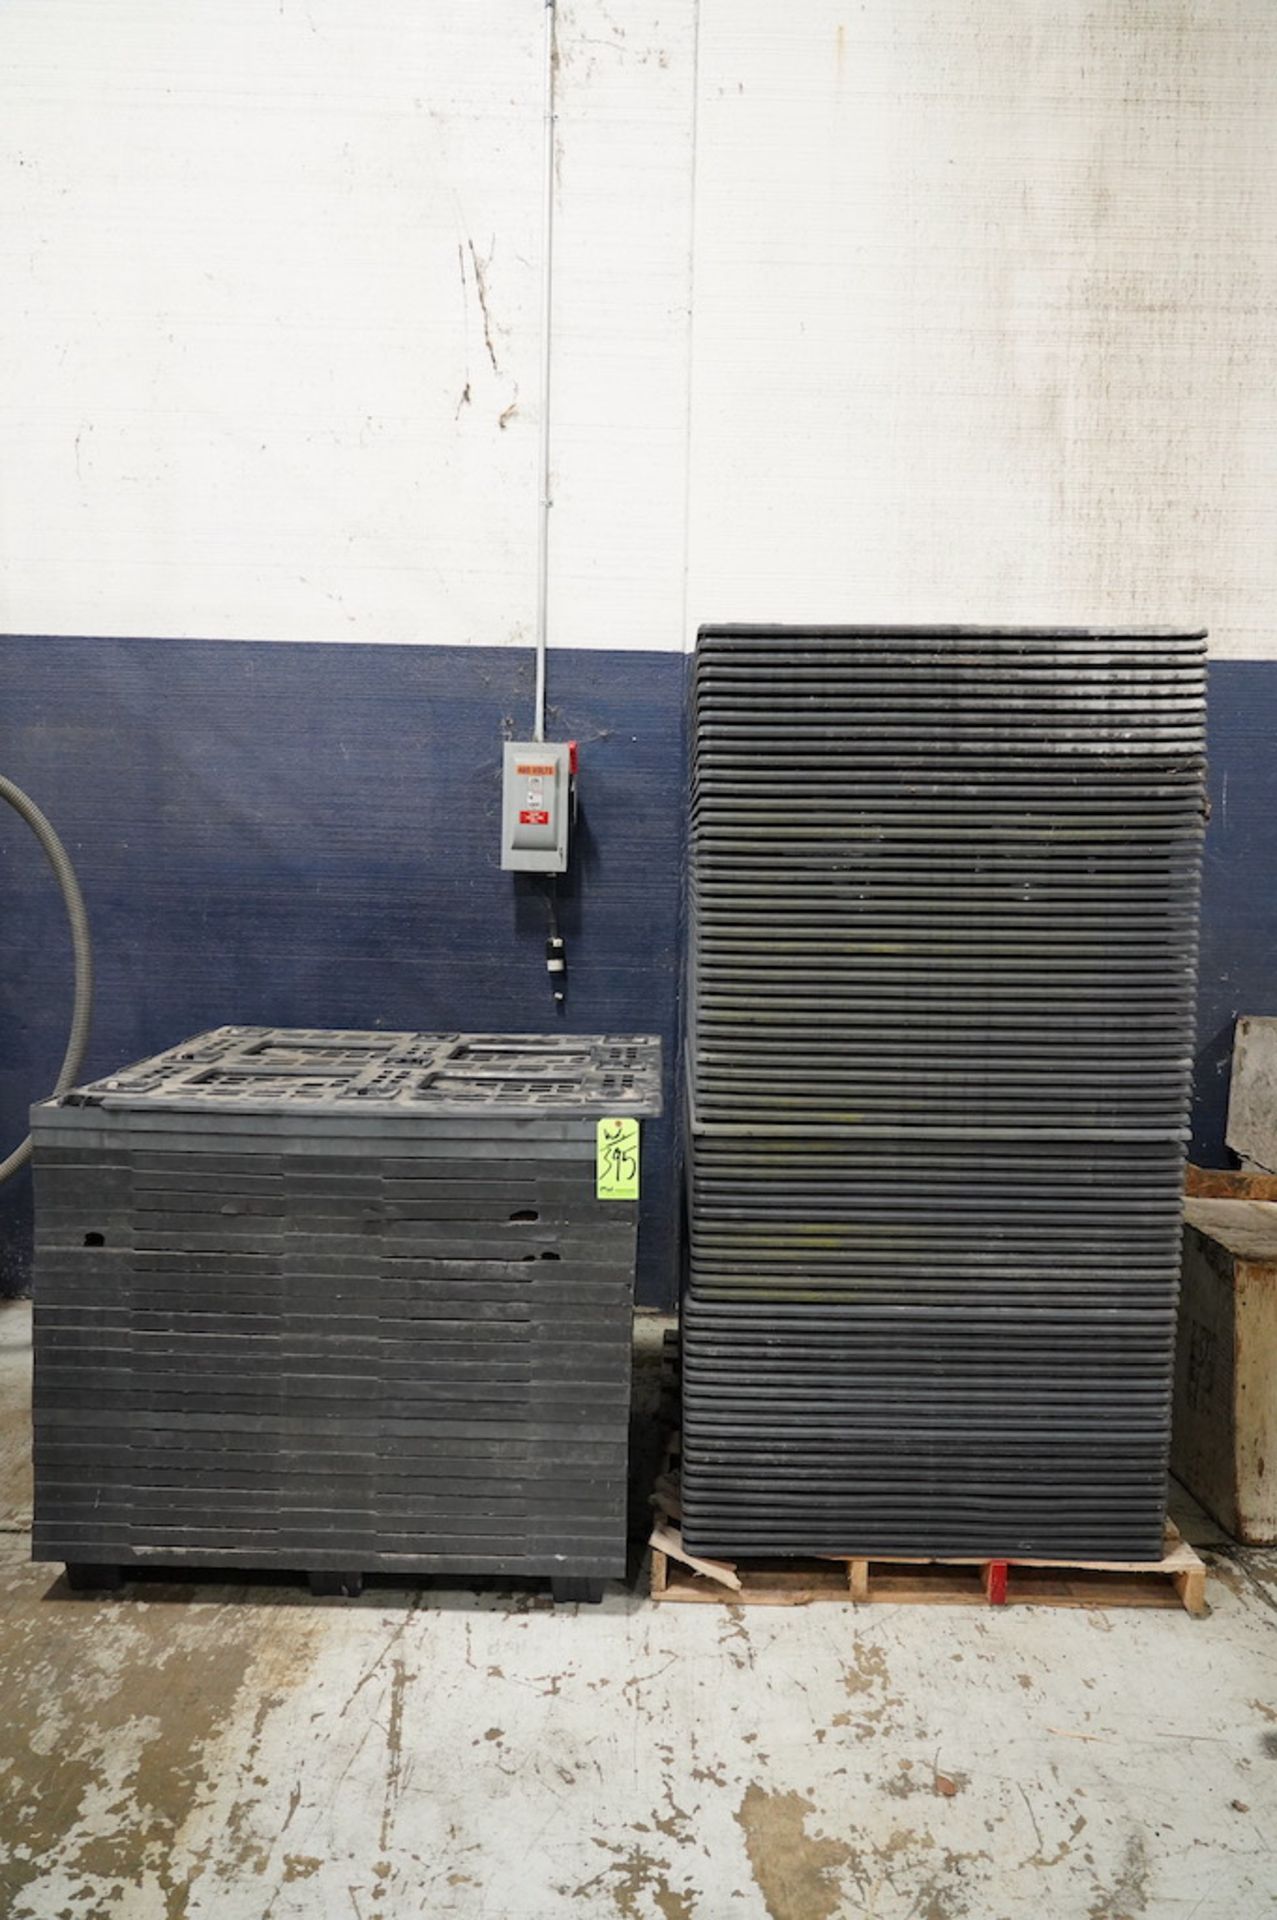 40" x 48" Plastic Pallet Mold w/(2) Molds - (1) For 40" x 48" Pallet, (1) For Snap-In Piece to make - Image 7 of 7